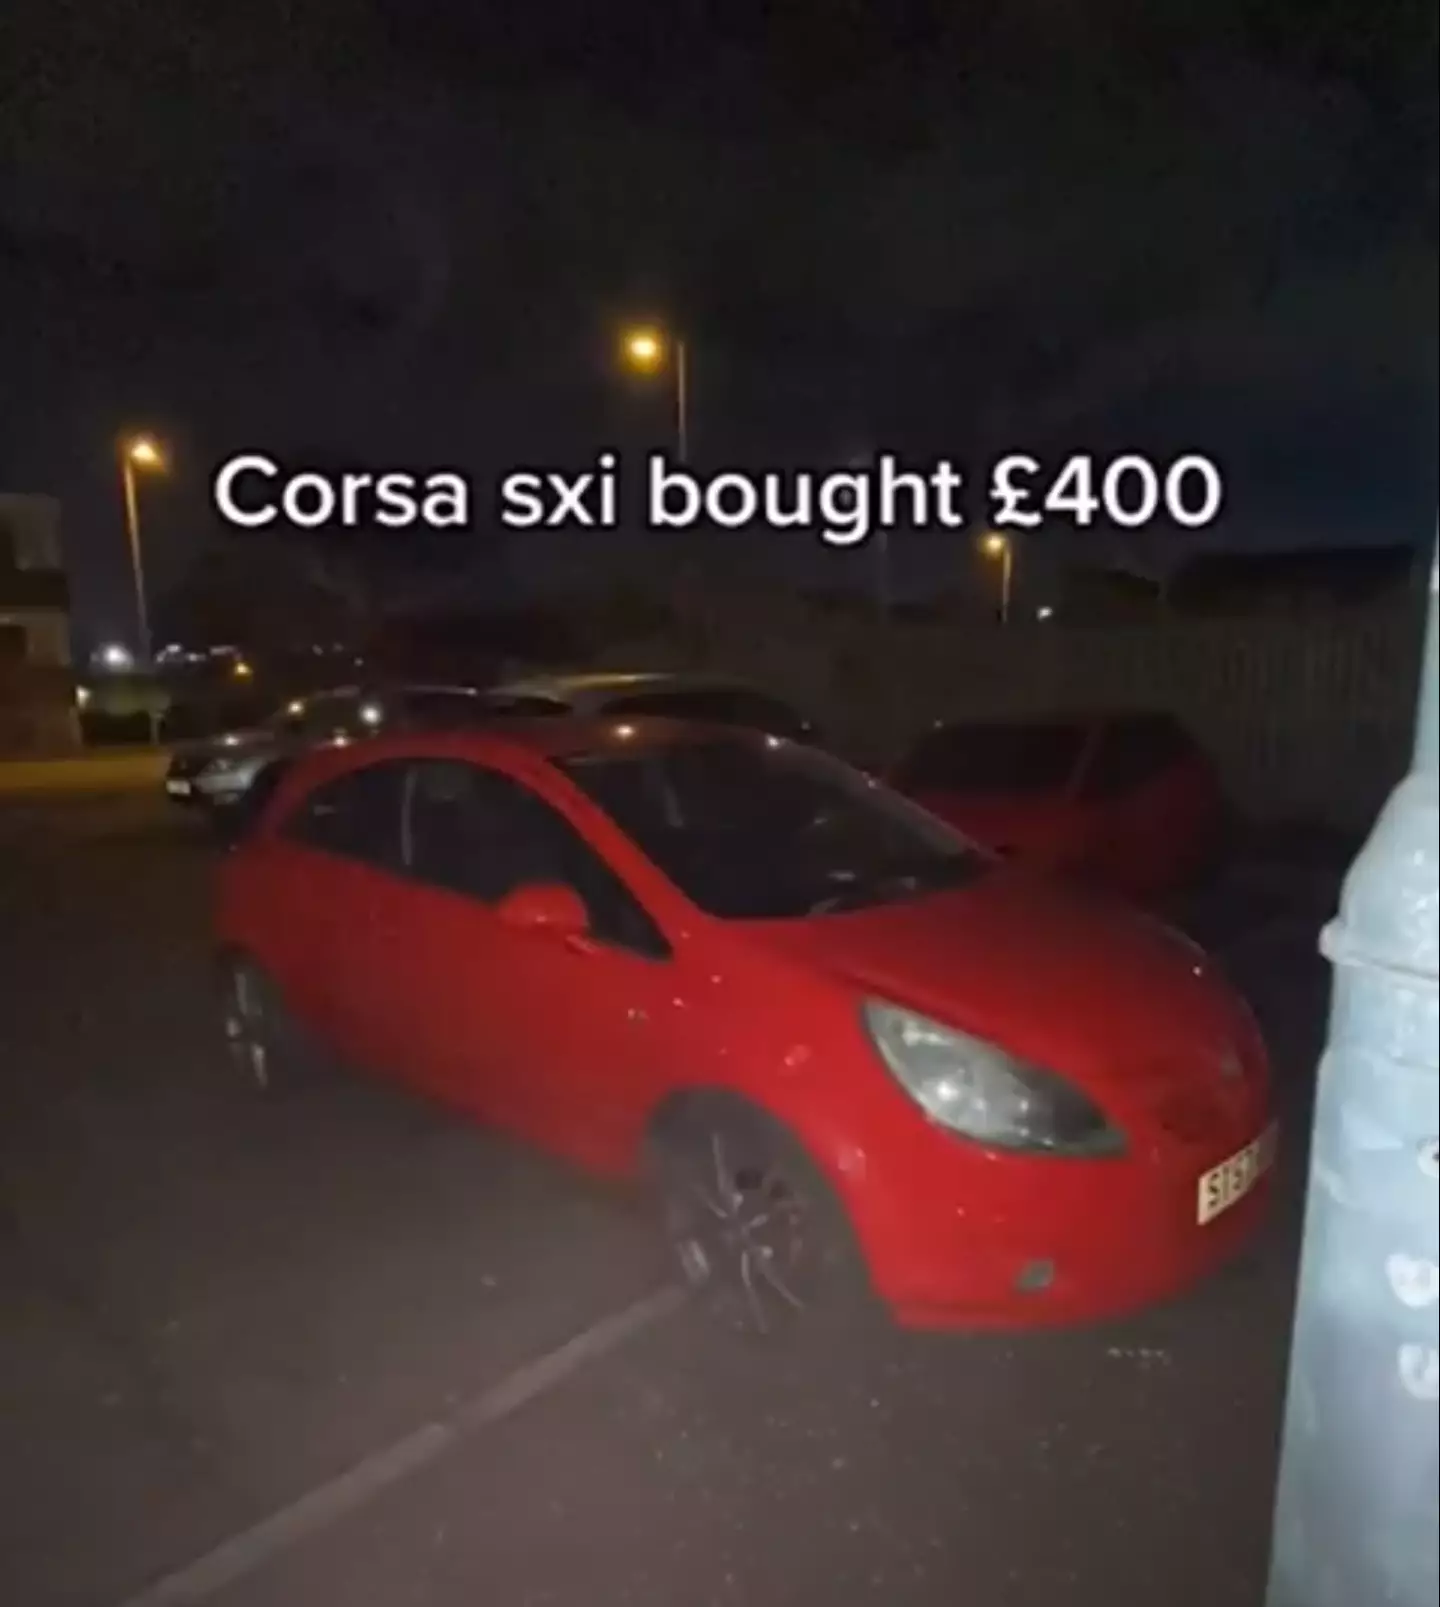 The TikToker bought the car for only £400.